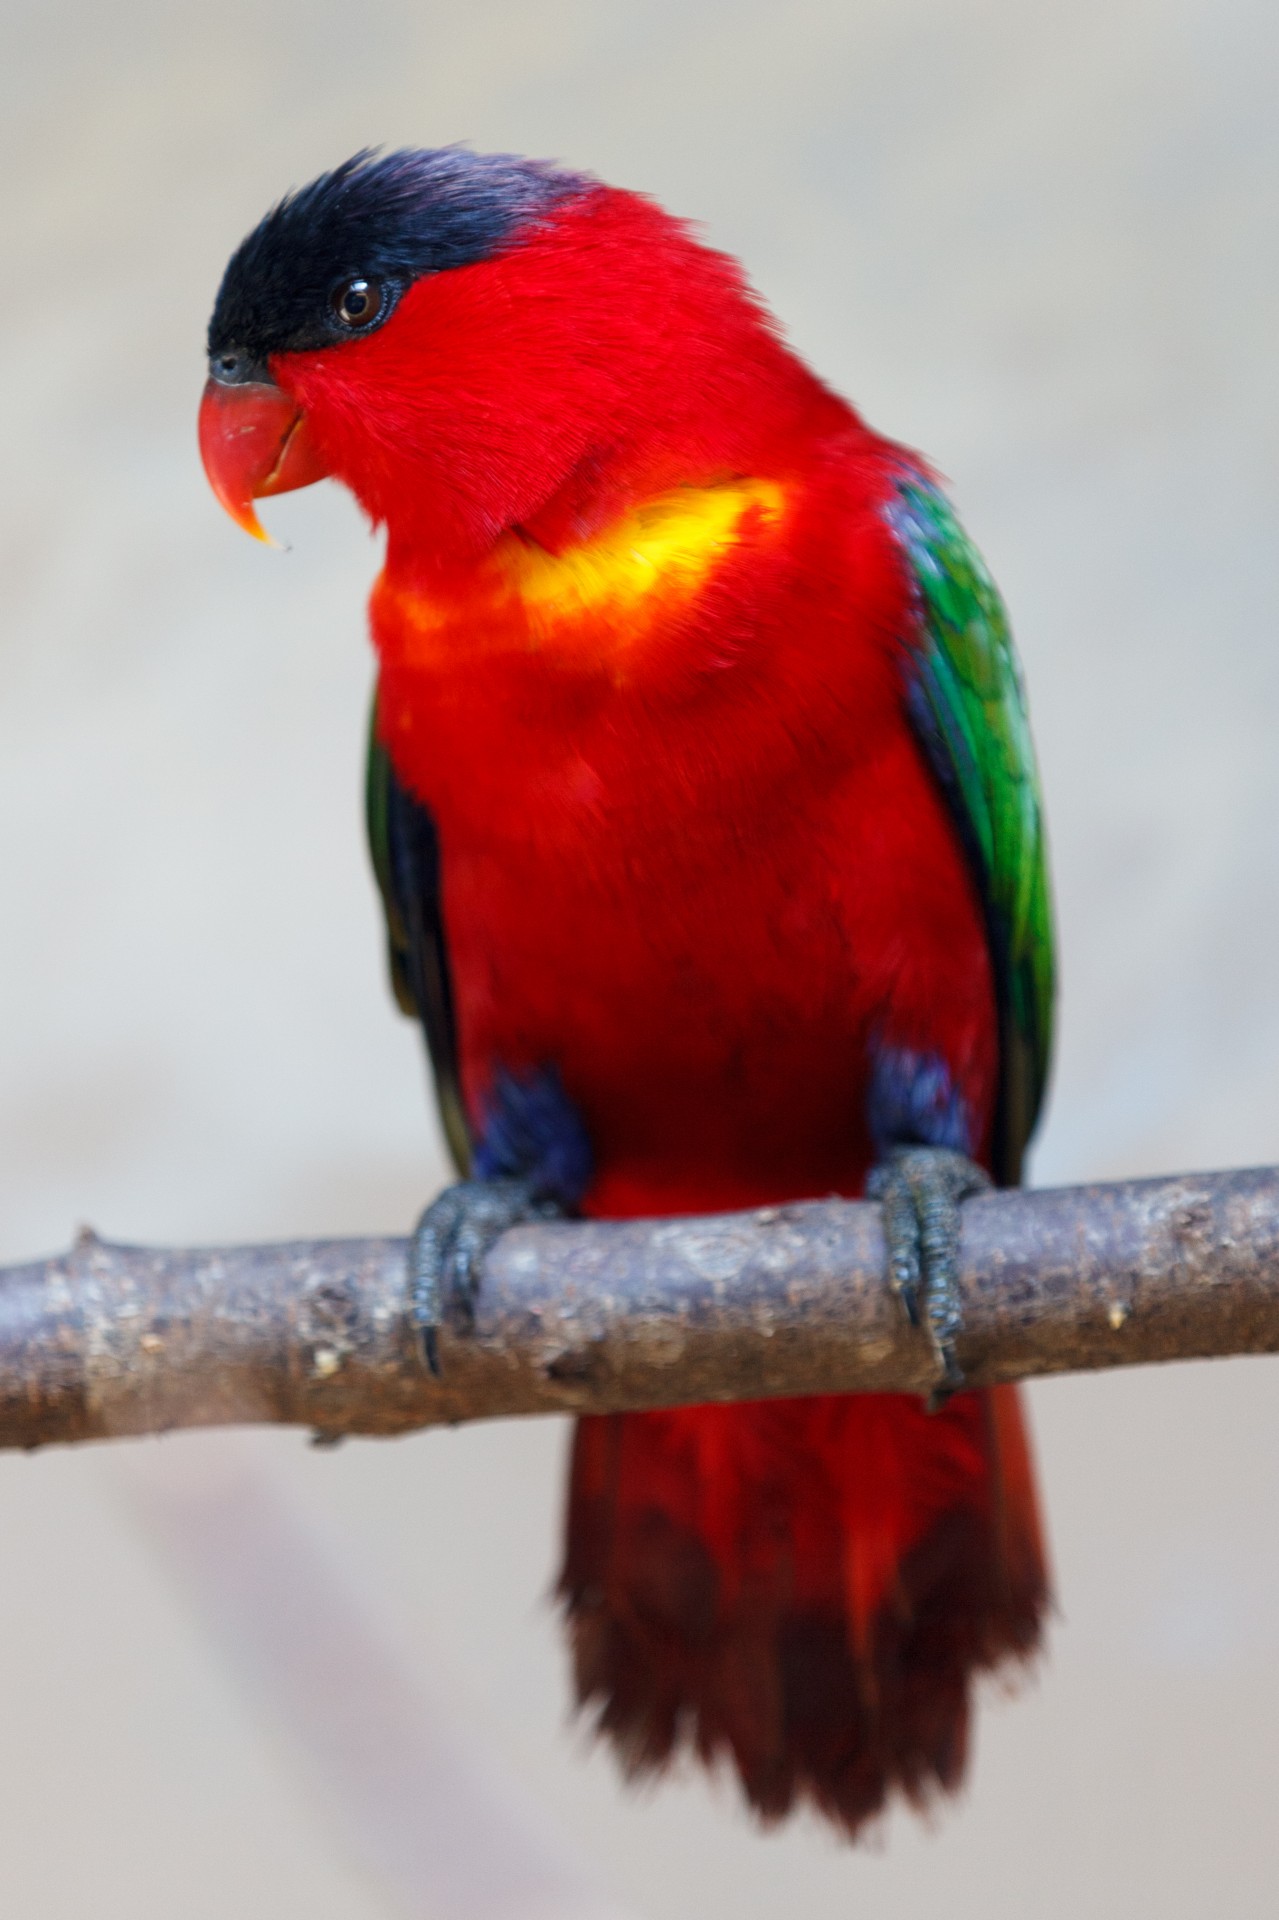 Violet-naped lory